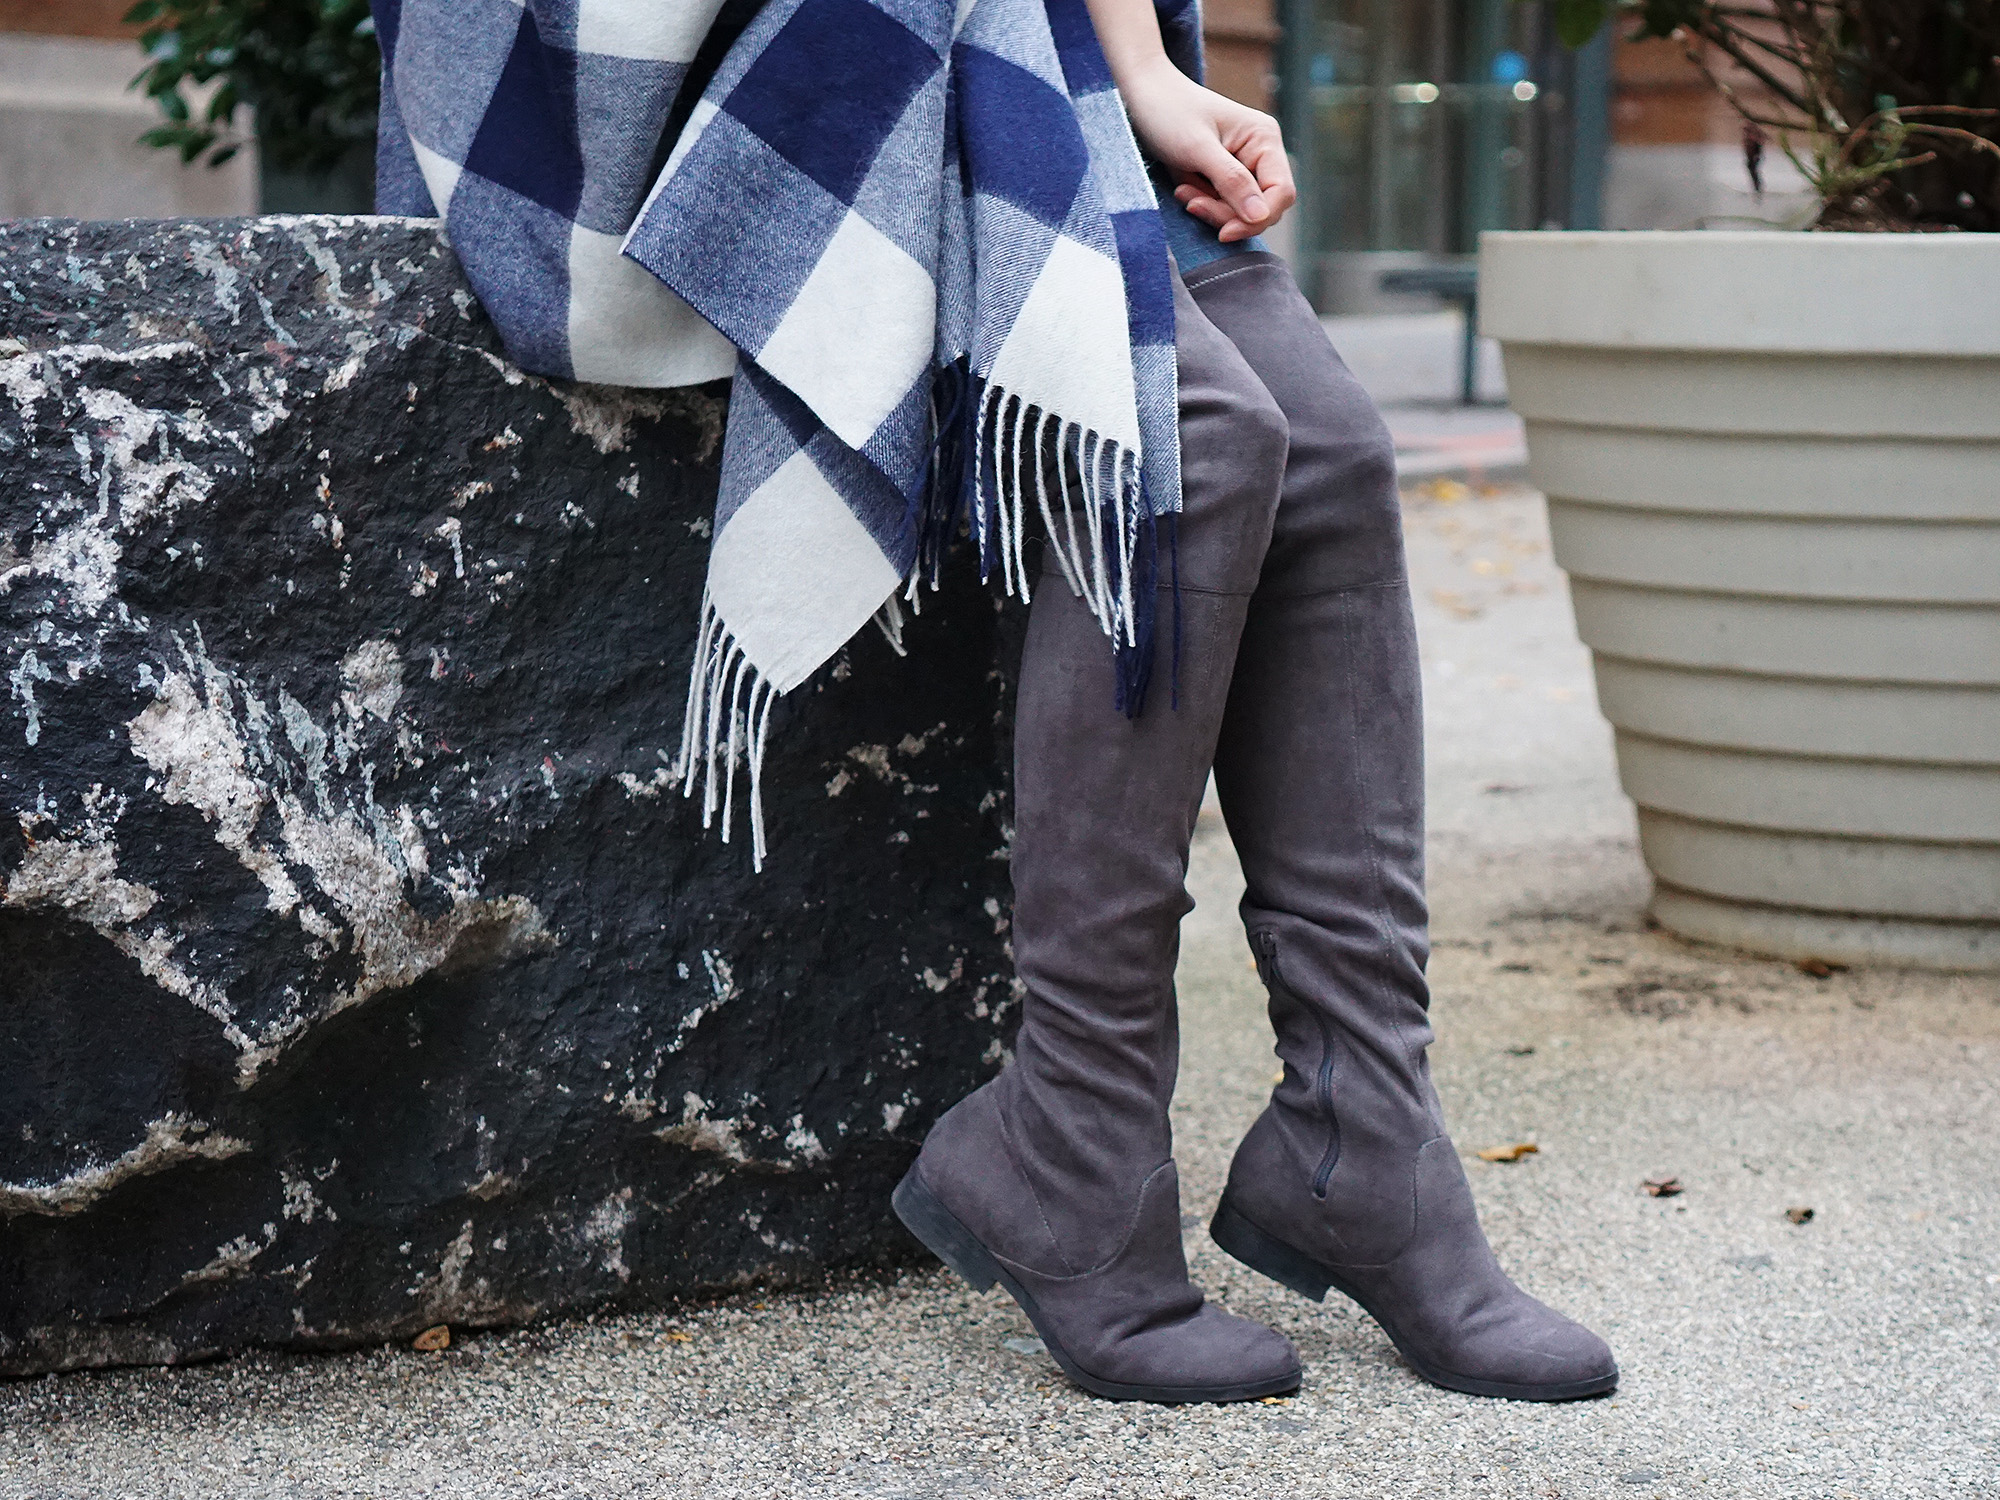 Skirt The Rules / Over the Knee OTK Boots in Grey Suede